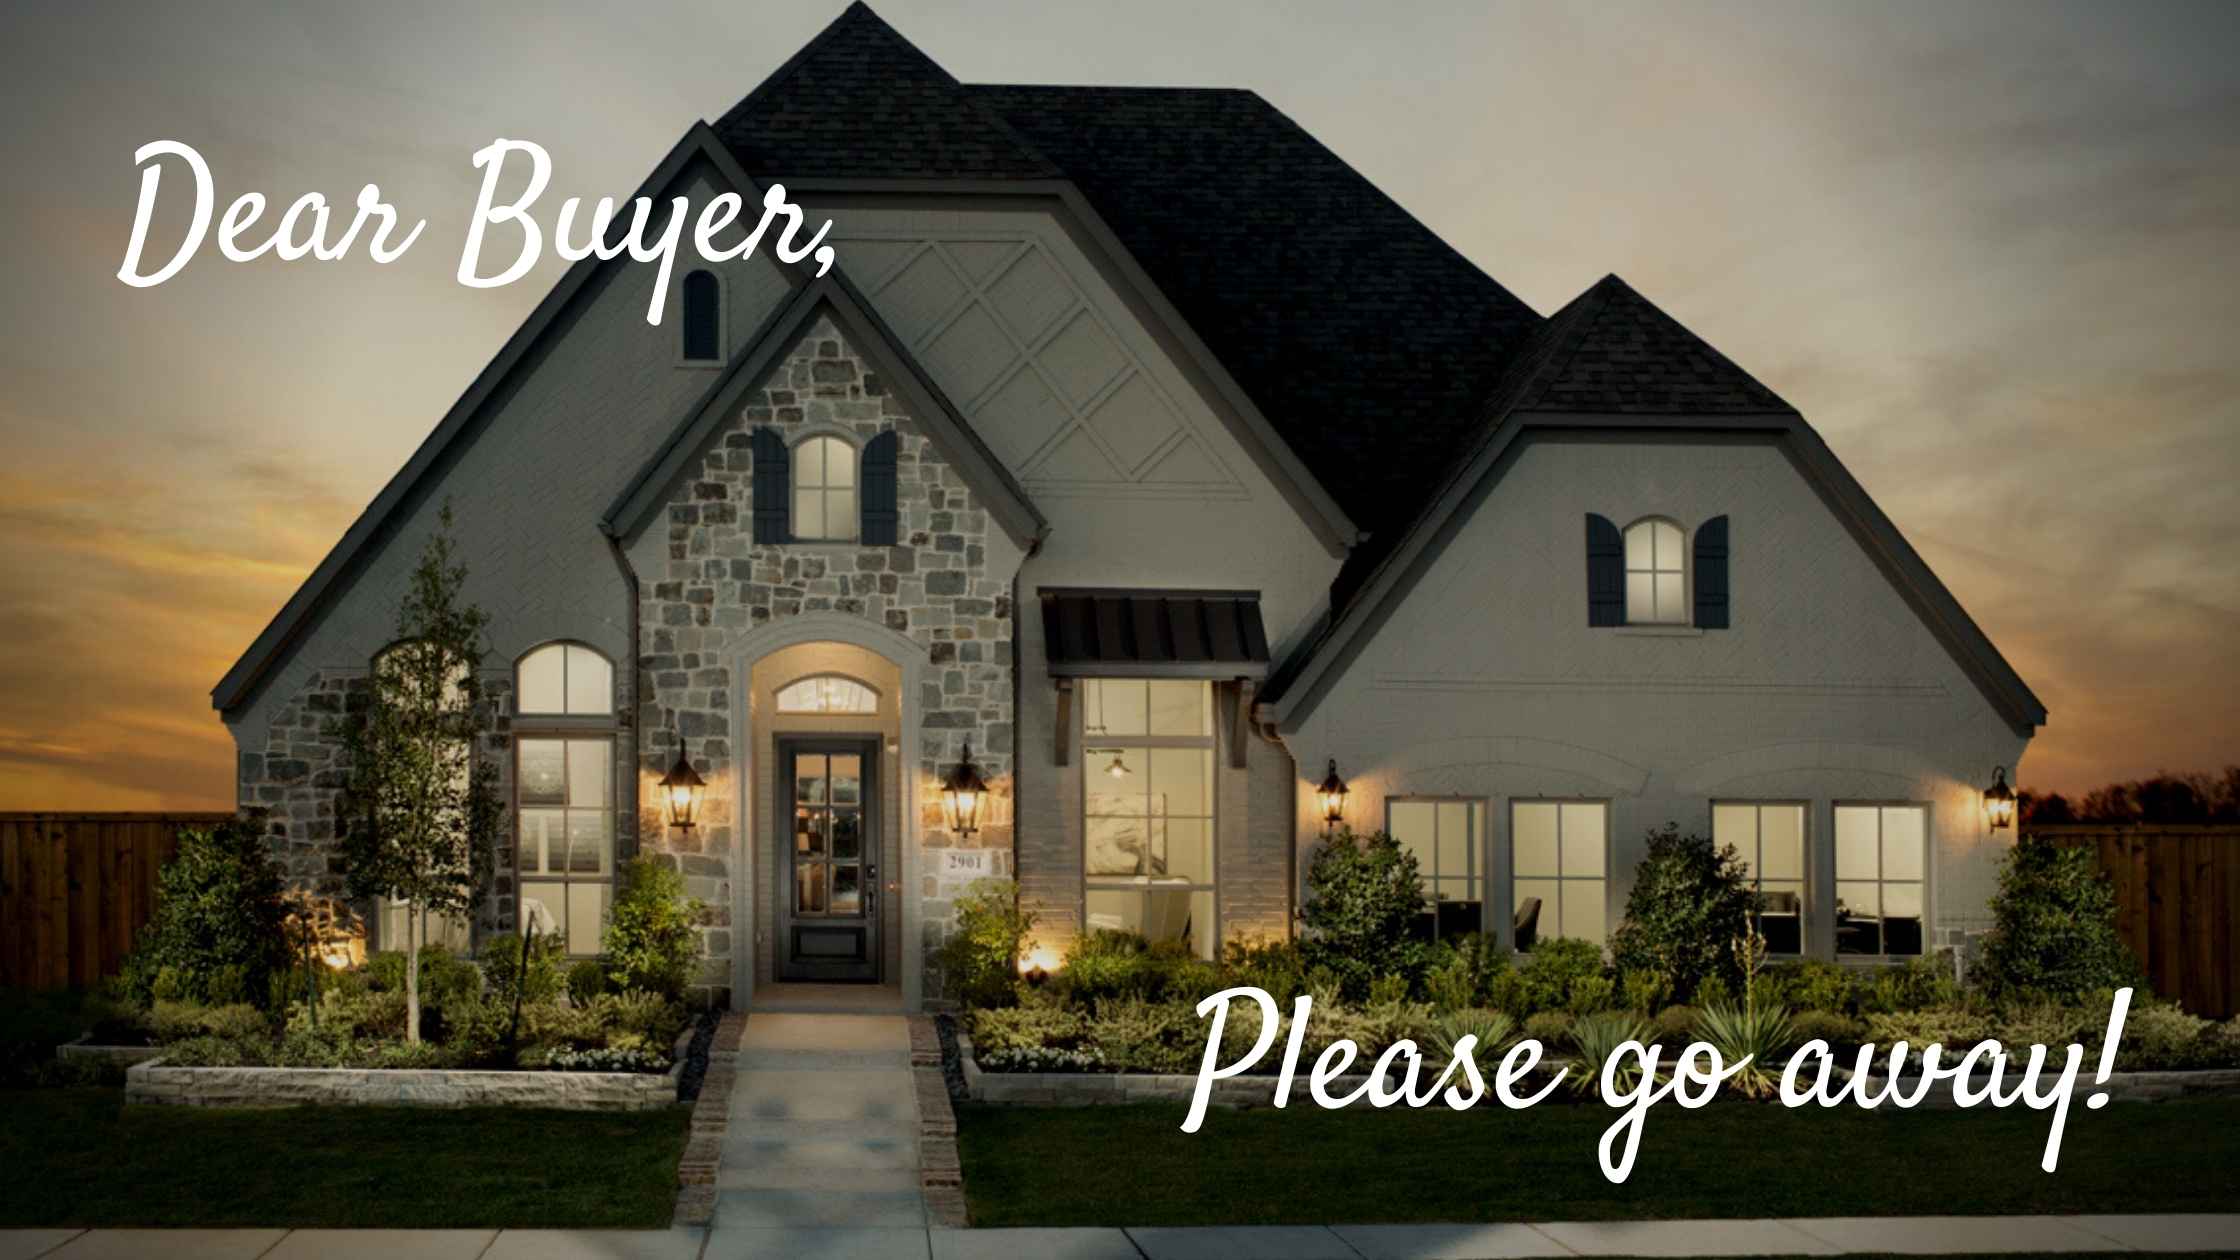 Prosper Tx builders are turning away buyers due to high demand